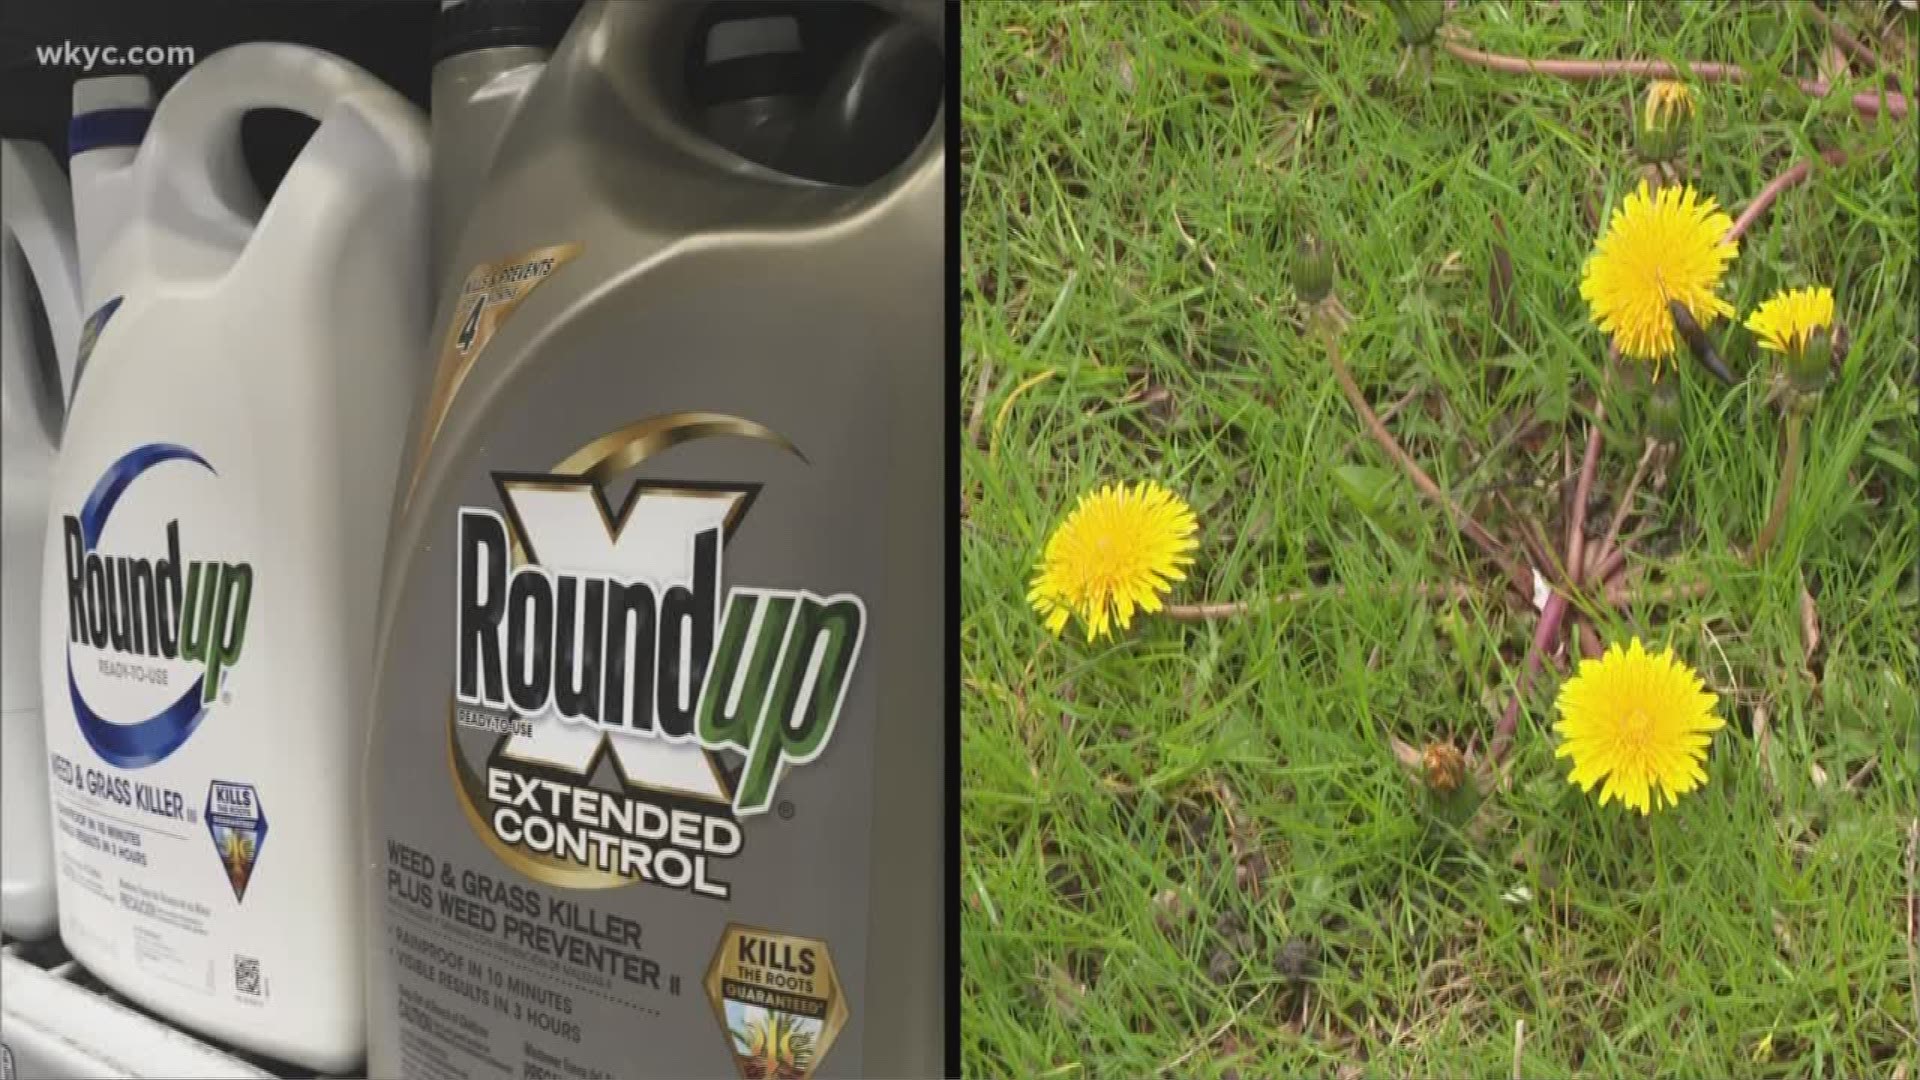 Debate continues over the safety of weed killers